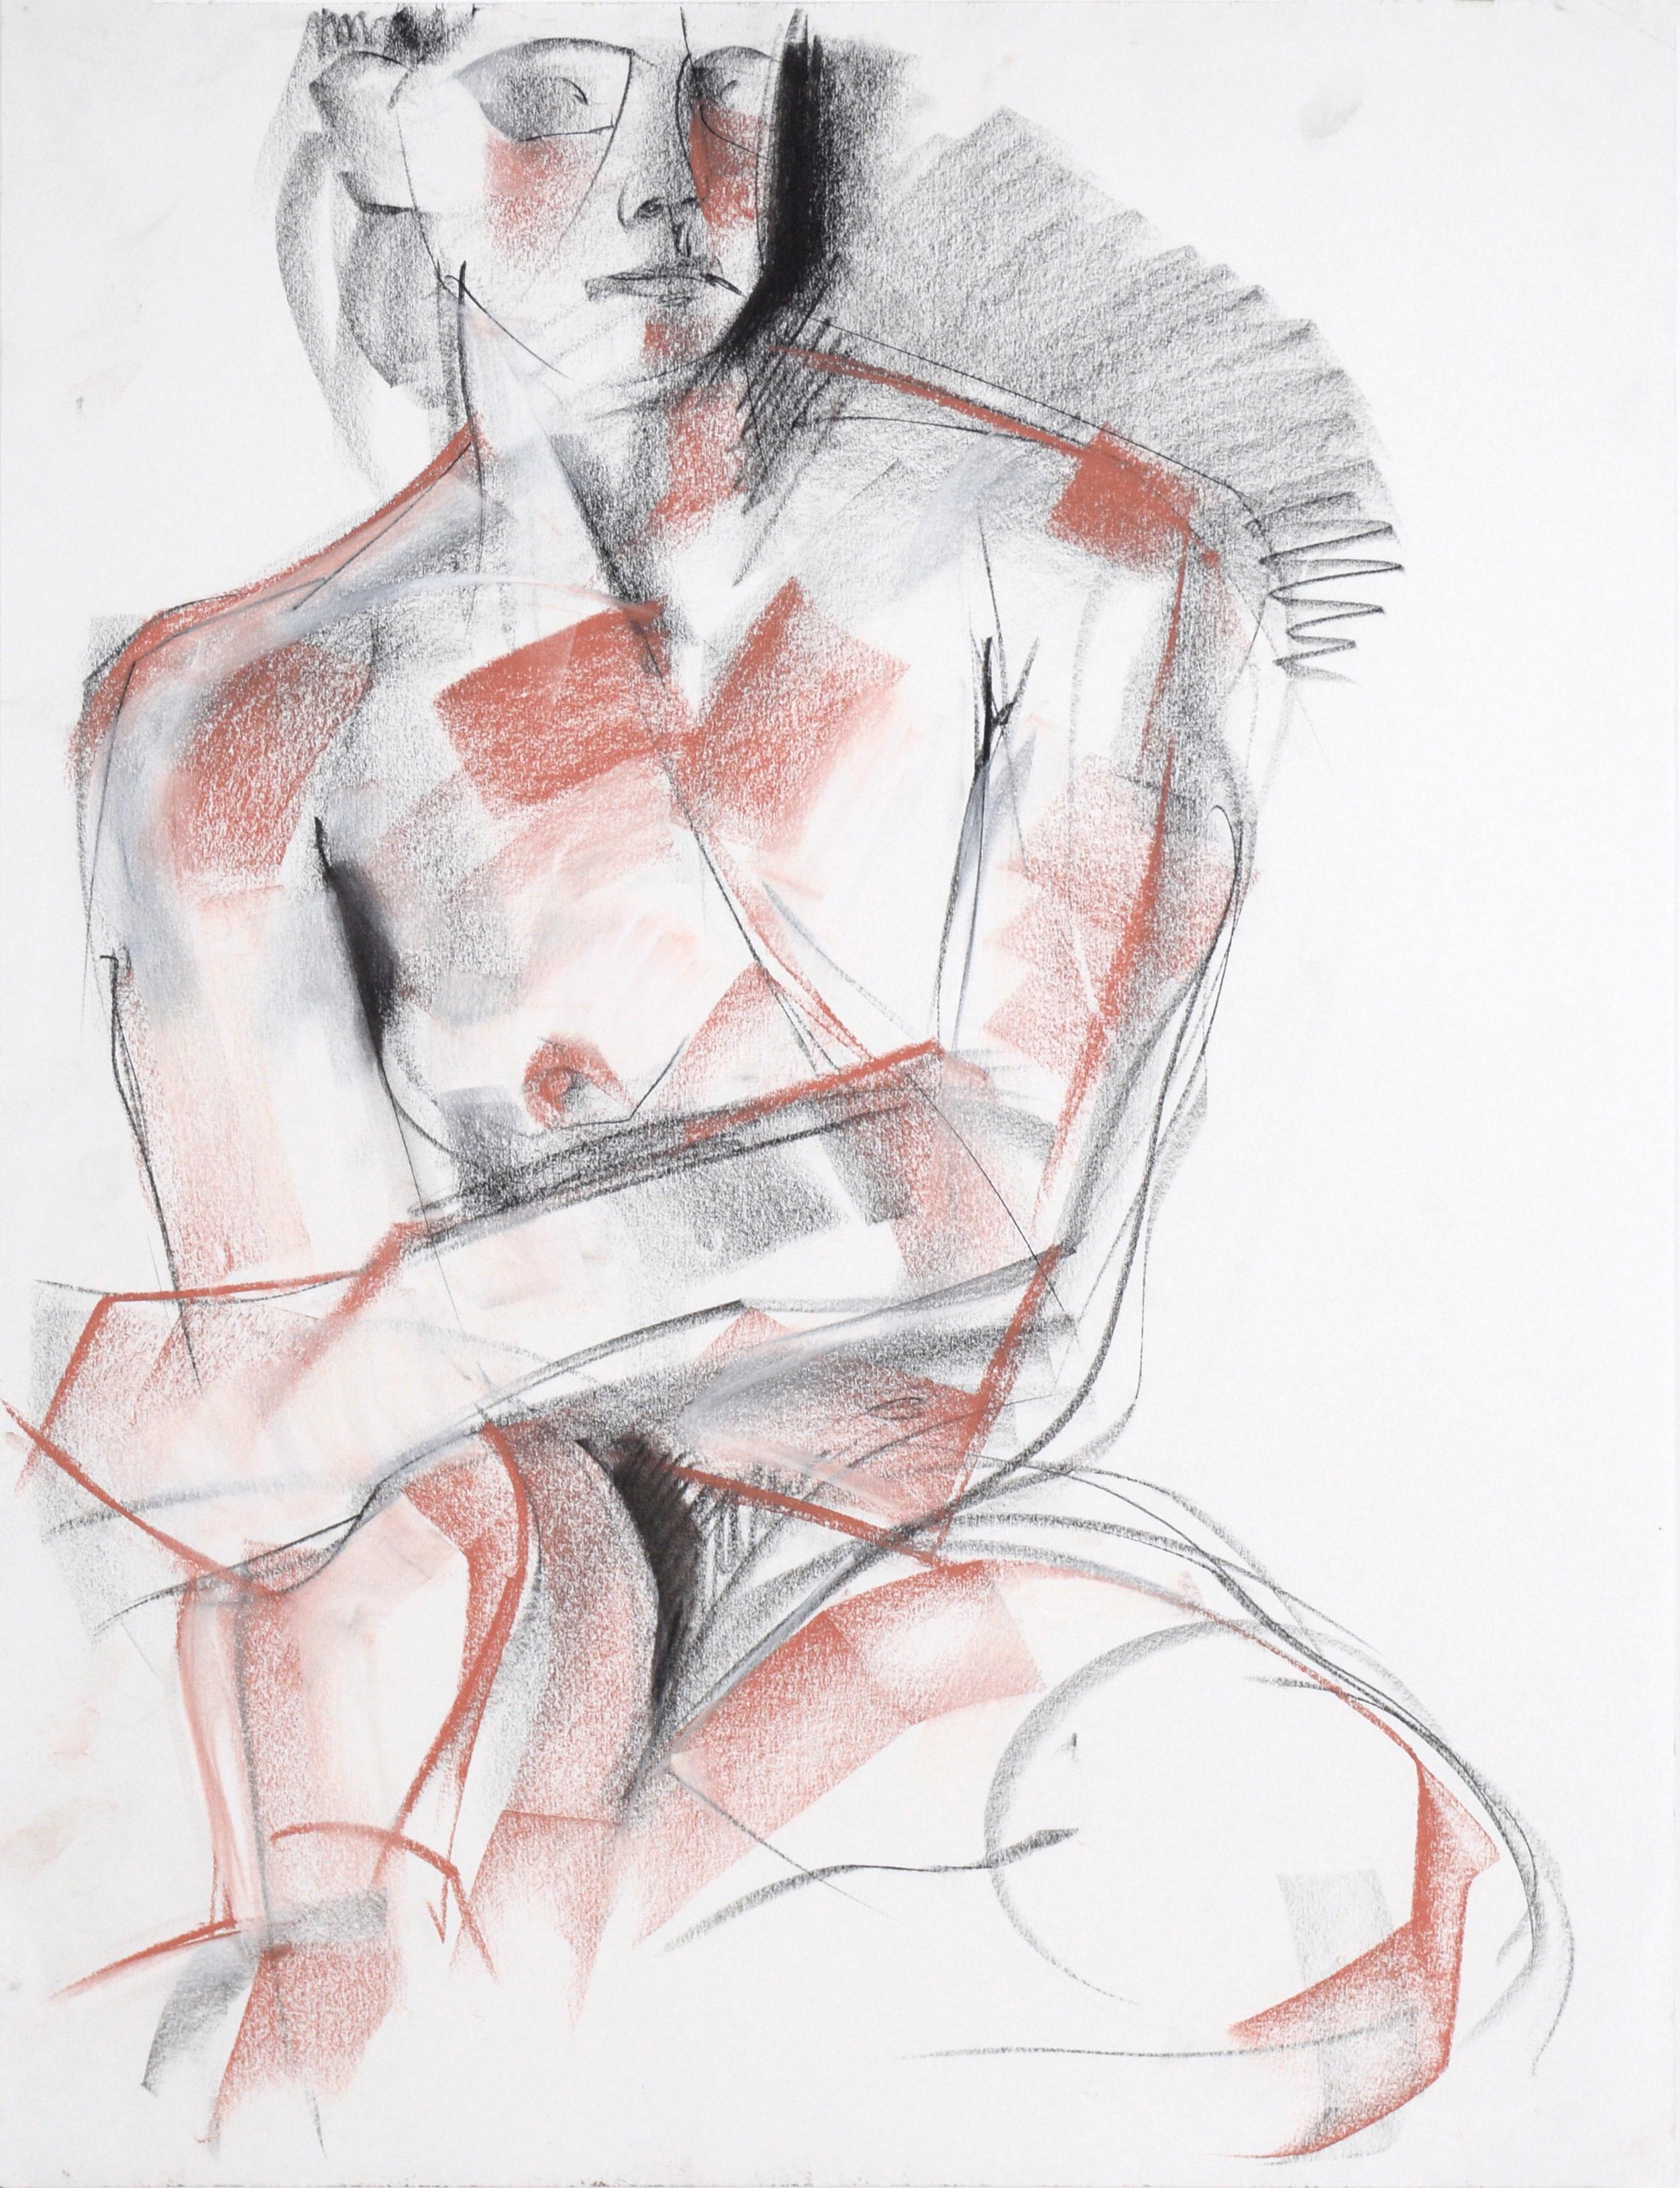 Heather Speck Figurative Art - Seated Nude in Charcoal on Paper